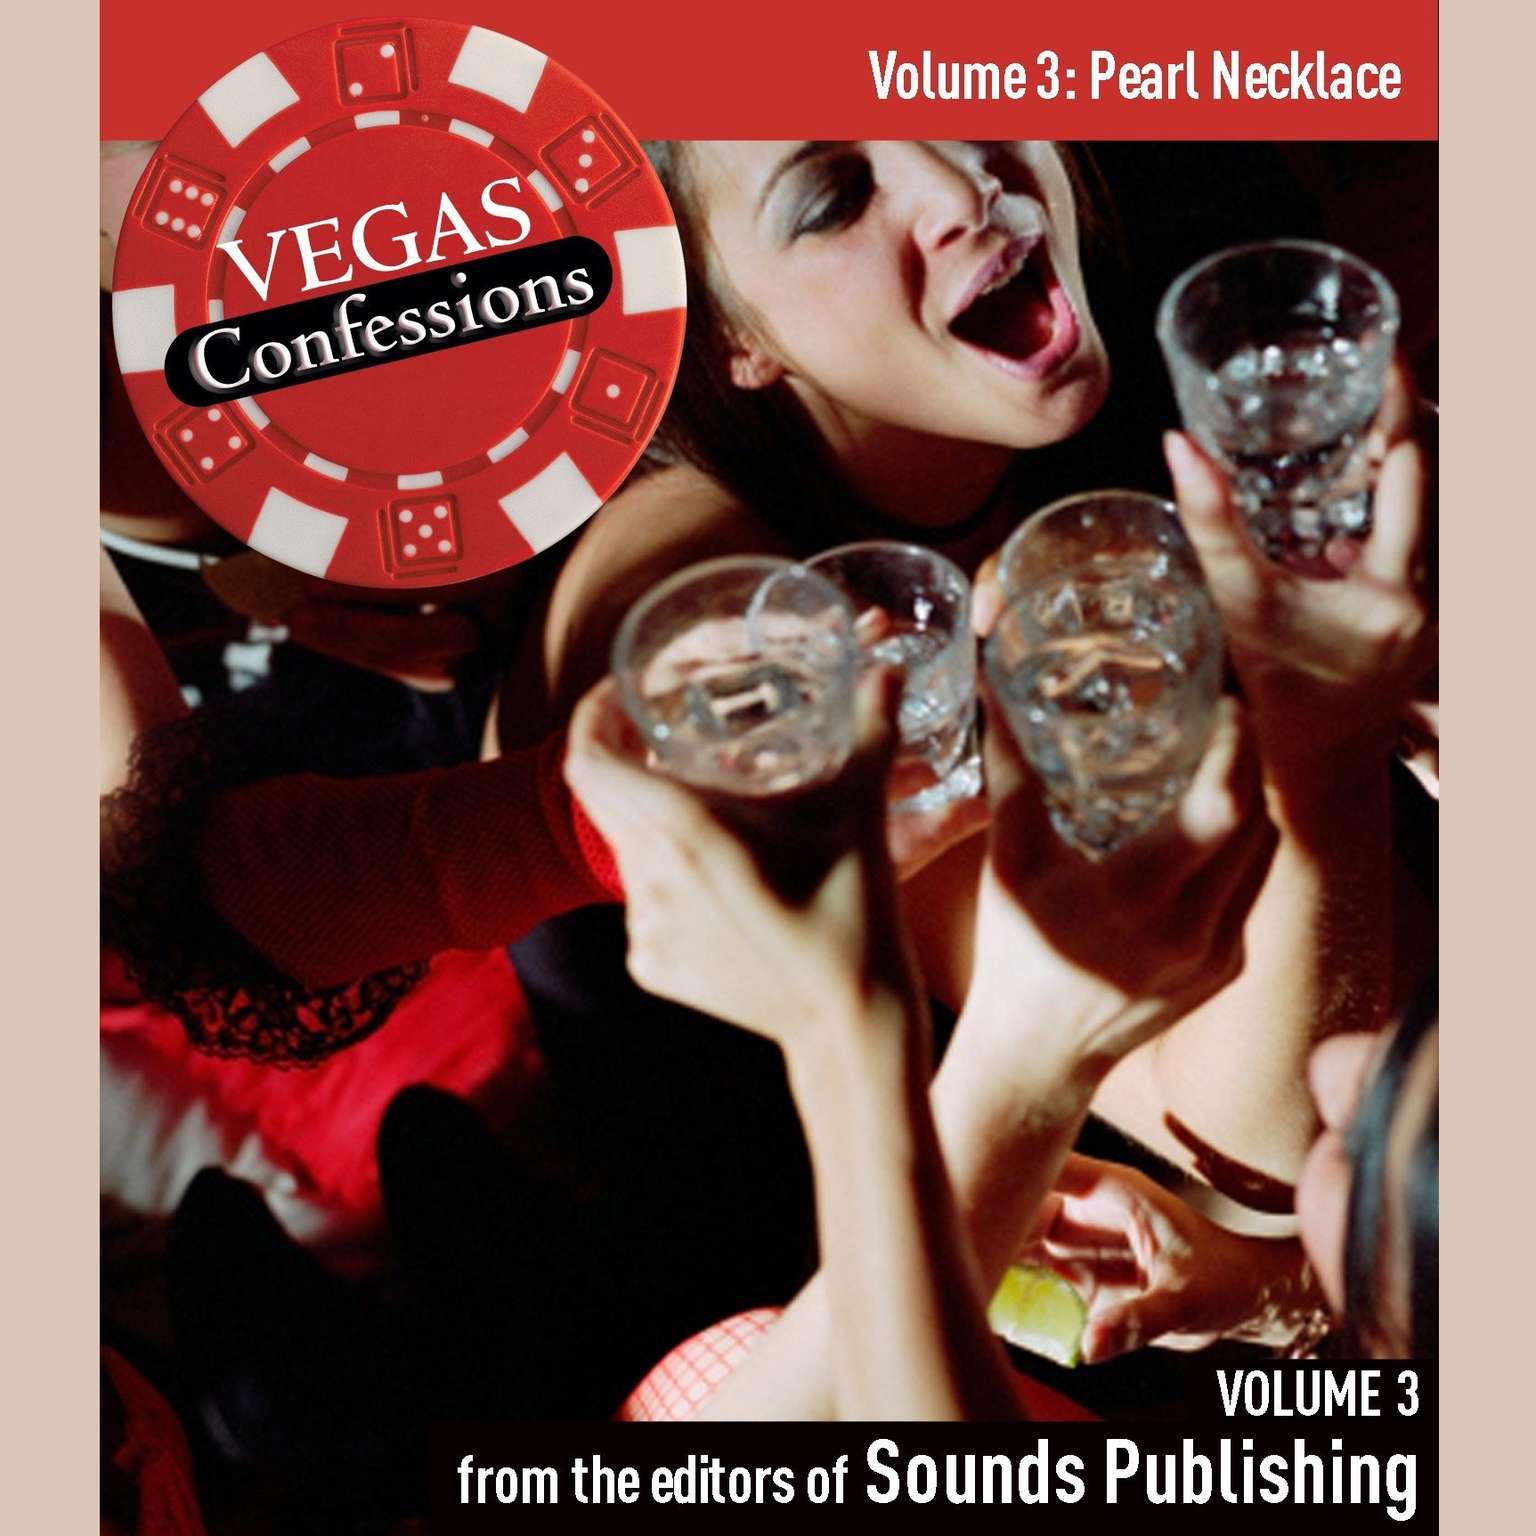 Vegas Confessions 3: Pearl Necklace Audiobook, by The Editors of Sounds Publishing